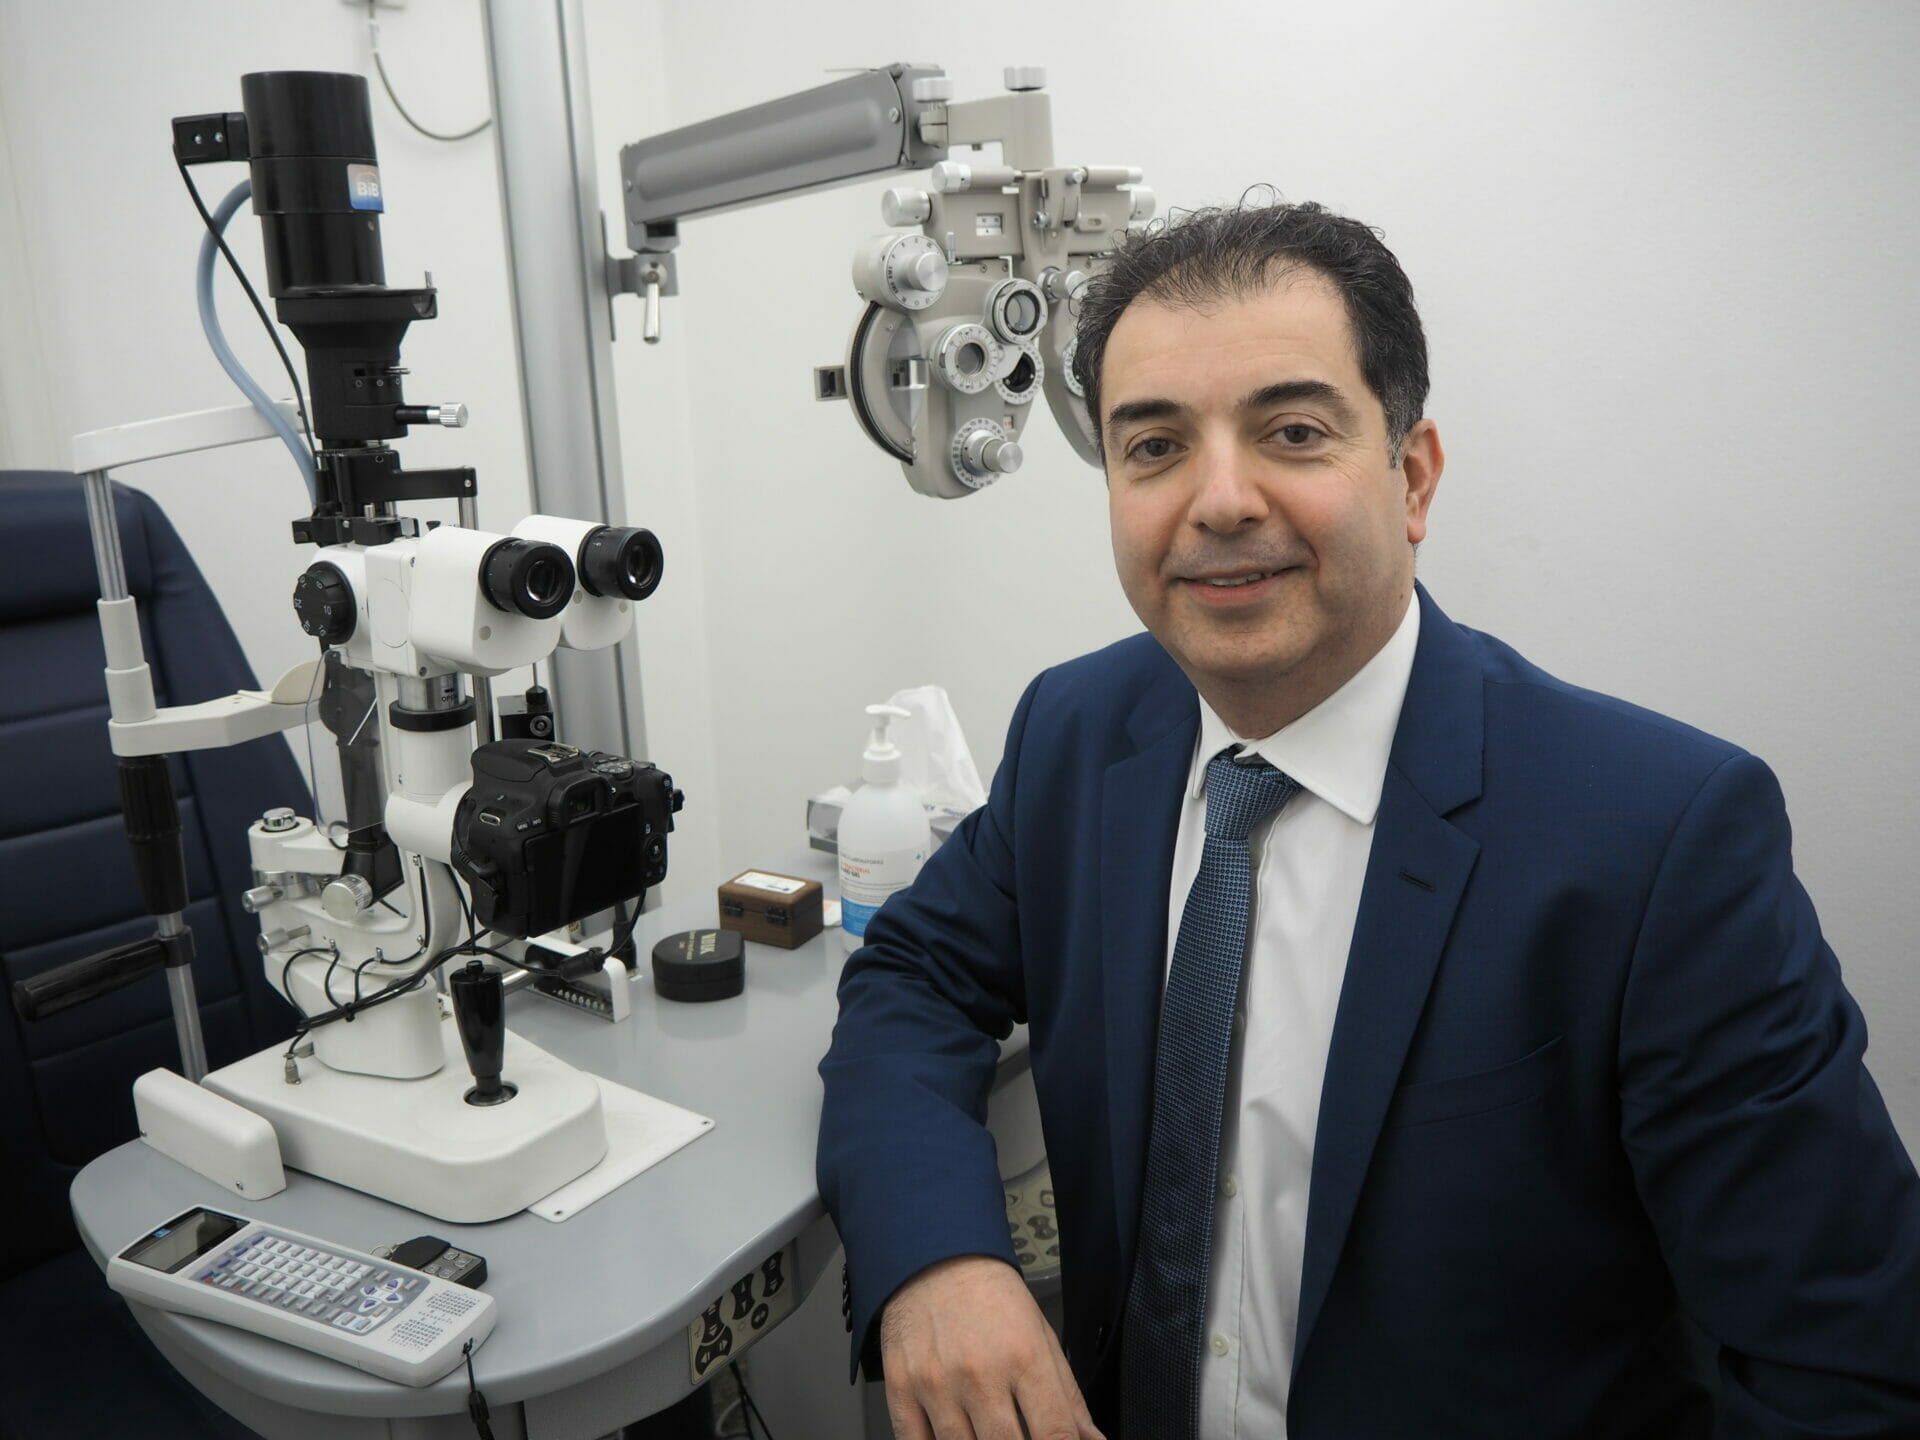 A portrait photo of Mr Samer Hamada smiling in a suit whilst leaning on a desk at the forefront of the image. In the background you can see eye testing equipment.